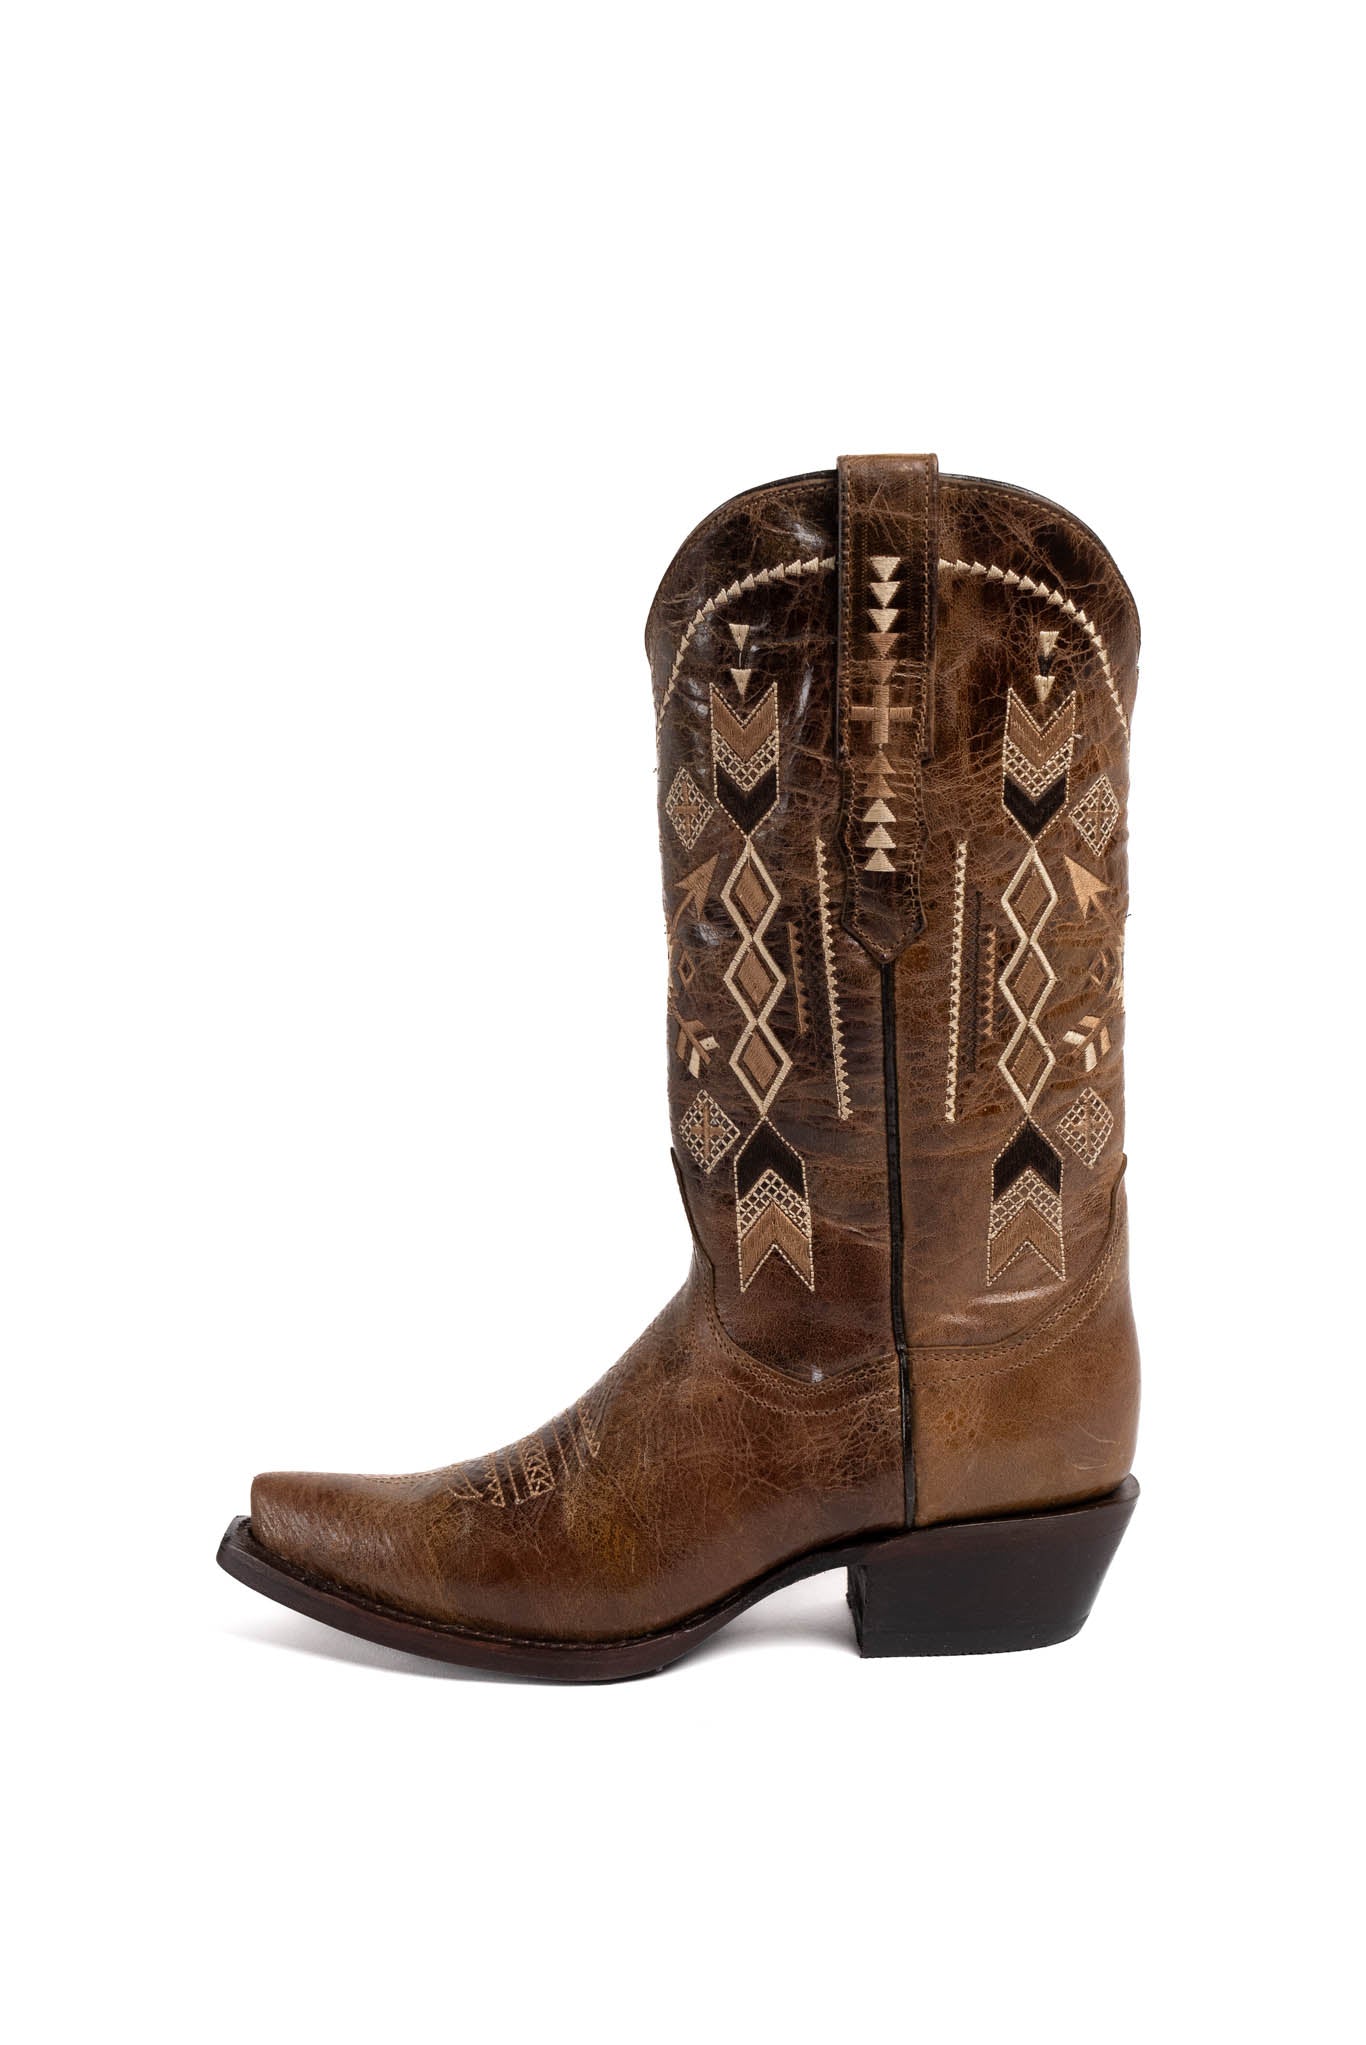 Azteck Snip Toe Cowgirl Boot